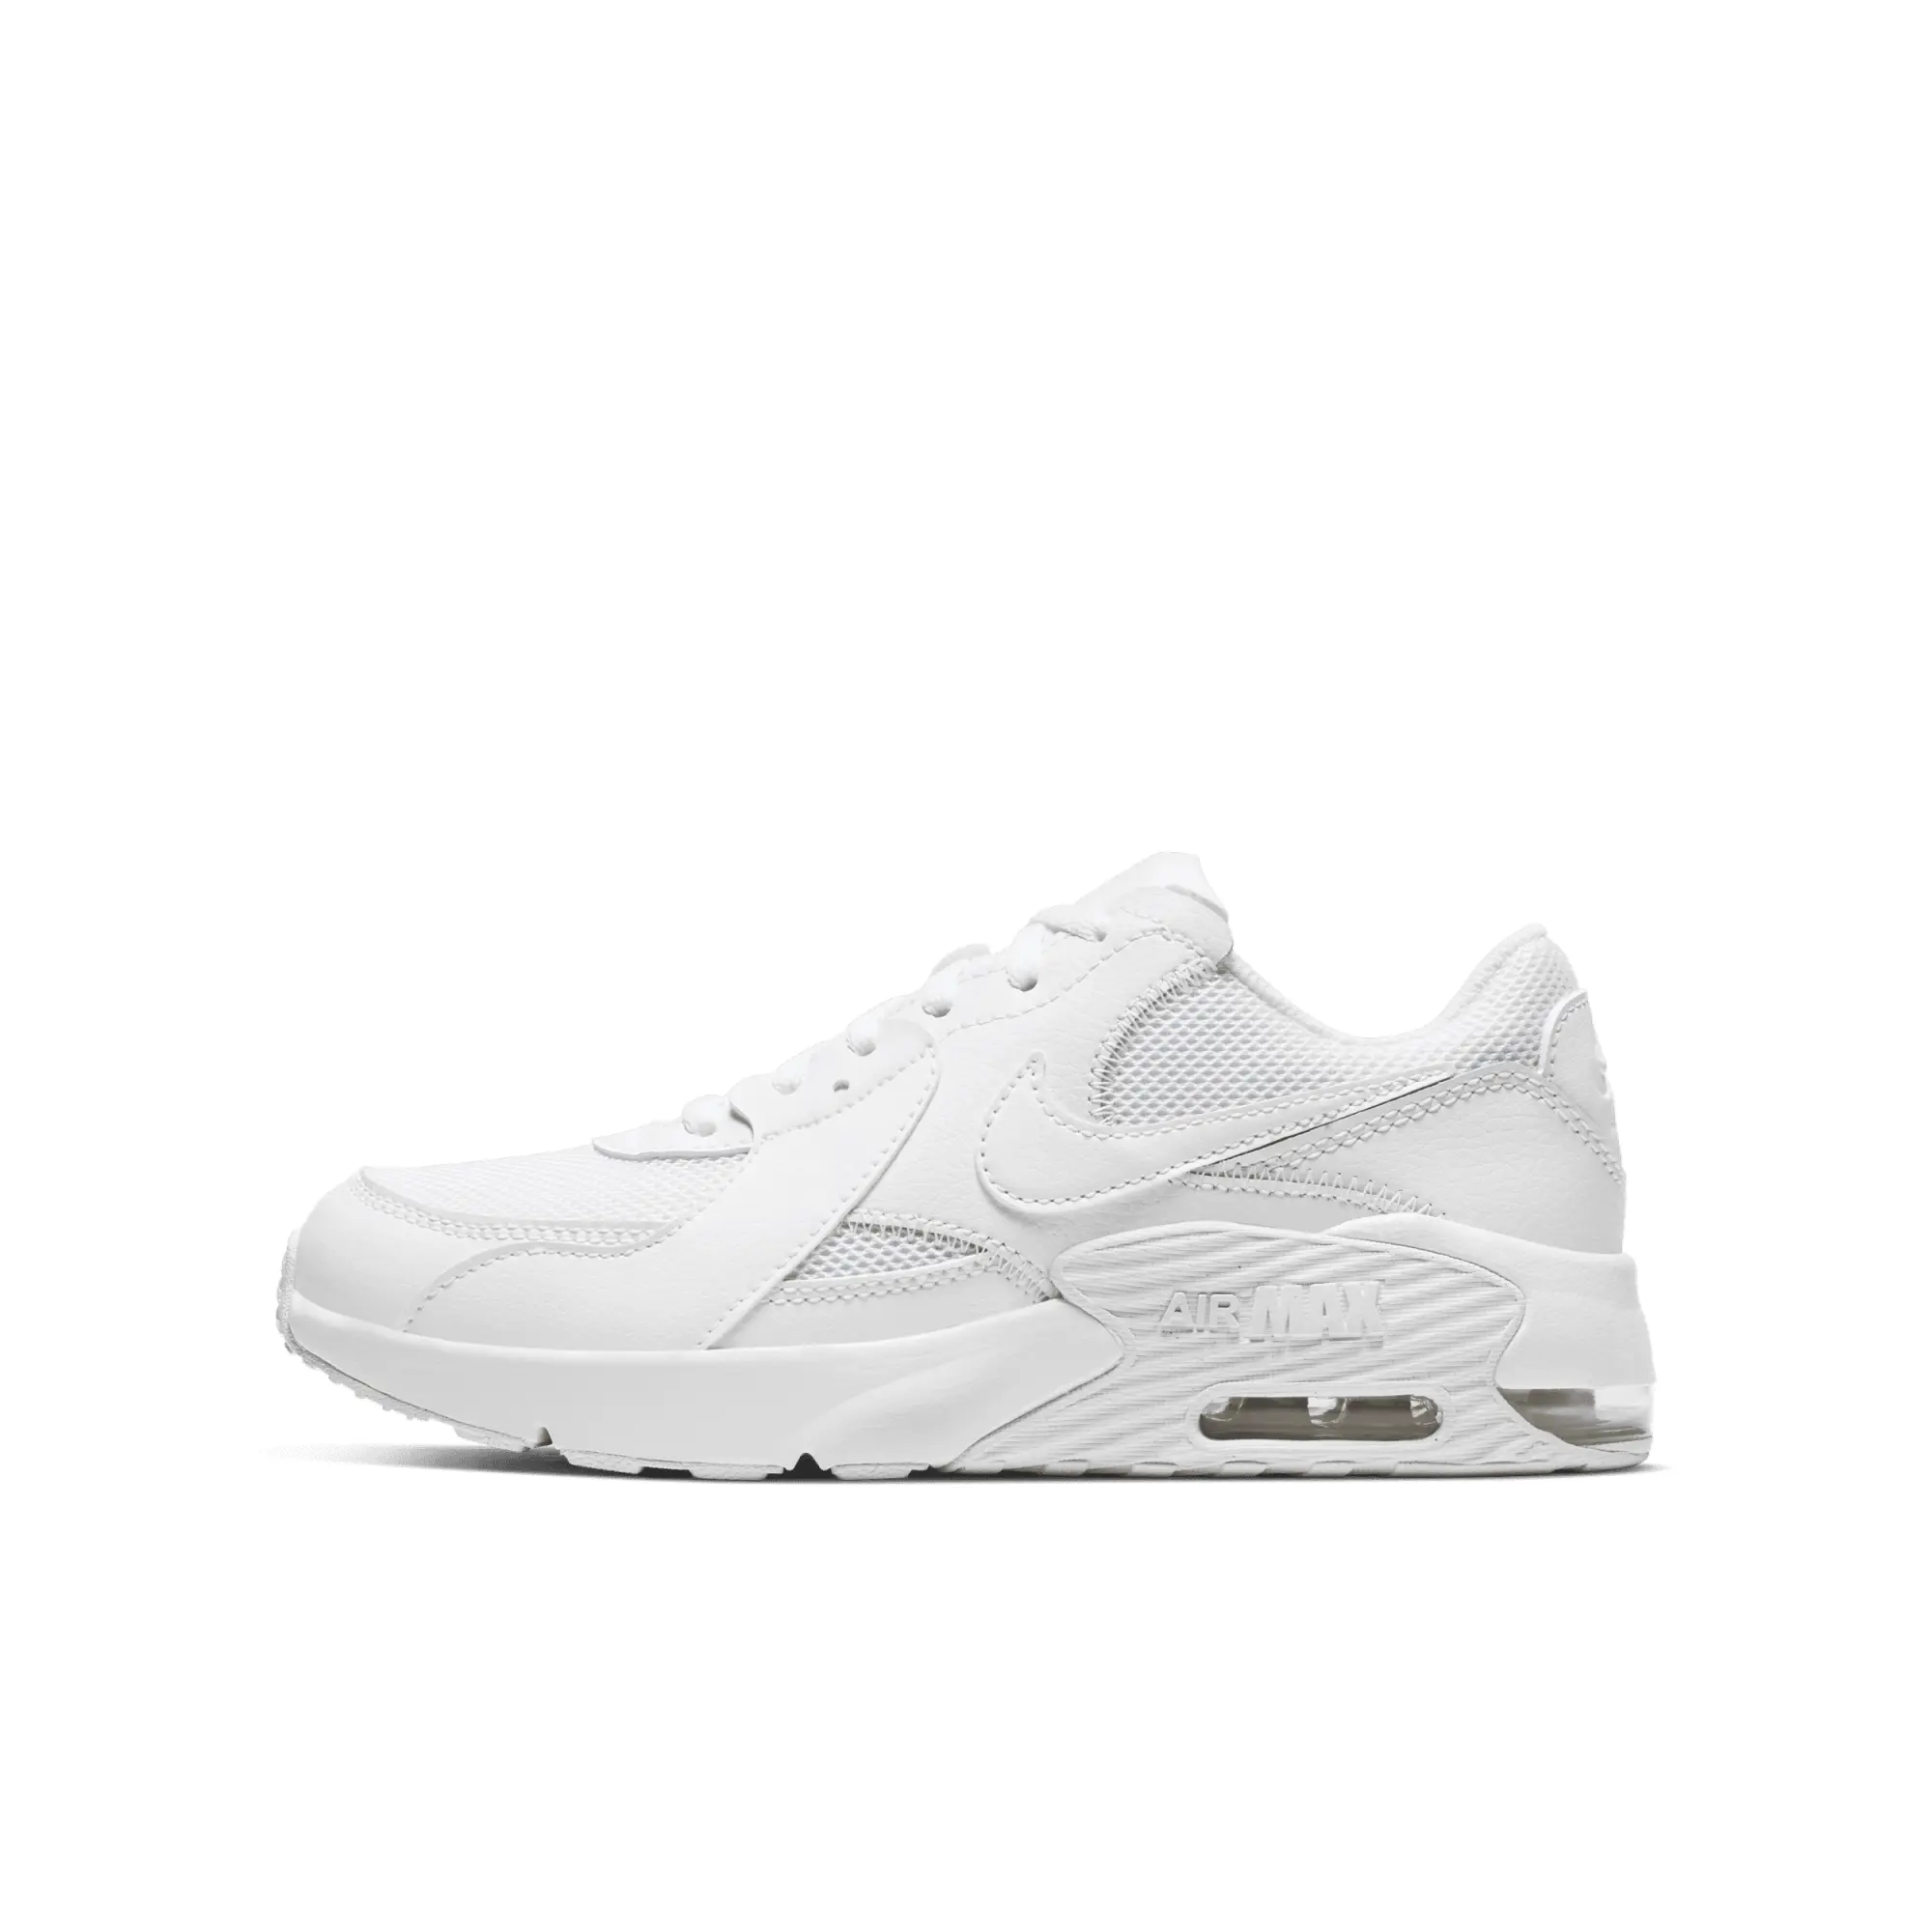 Nike Air Max Excee Junior Trainers